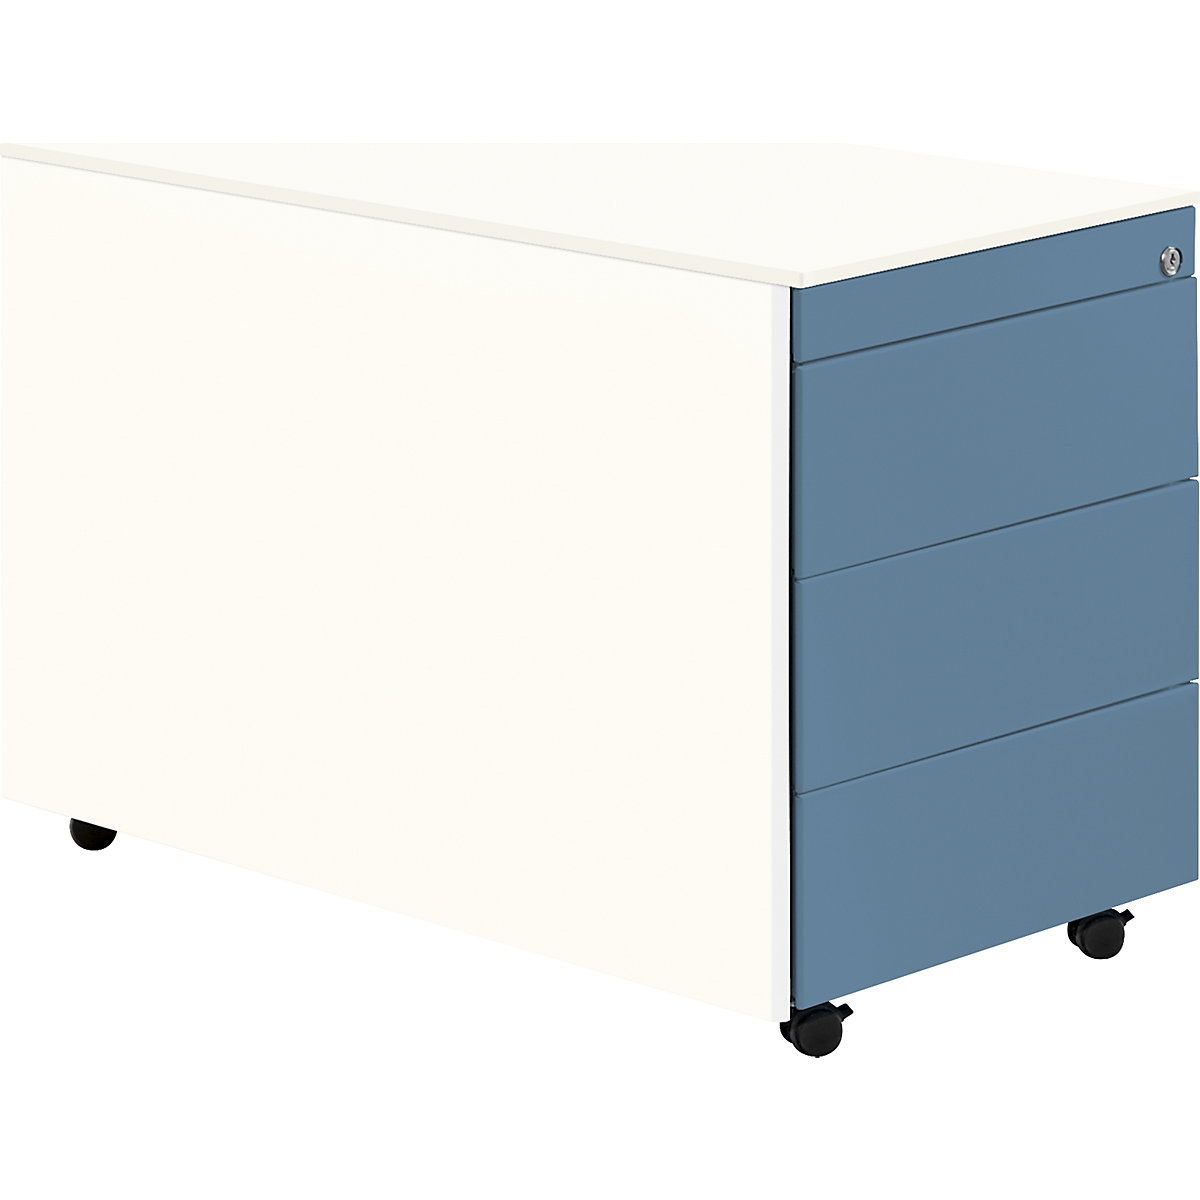 Drawer pedestal with castors – mauser, HxD 570 x 800 mm, steel top, 3 drawers, pure white / pigeon blue / pure white-6